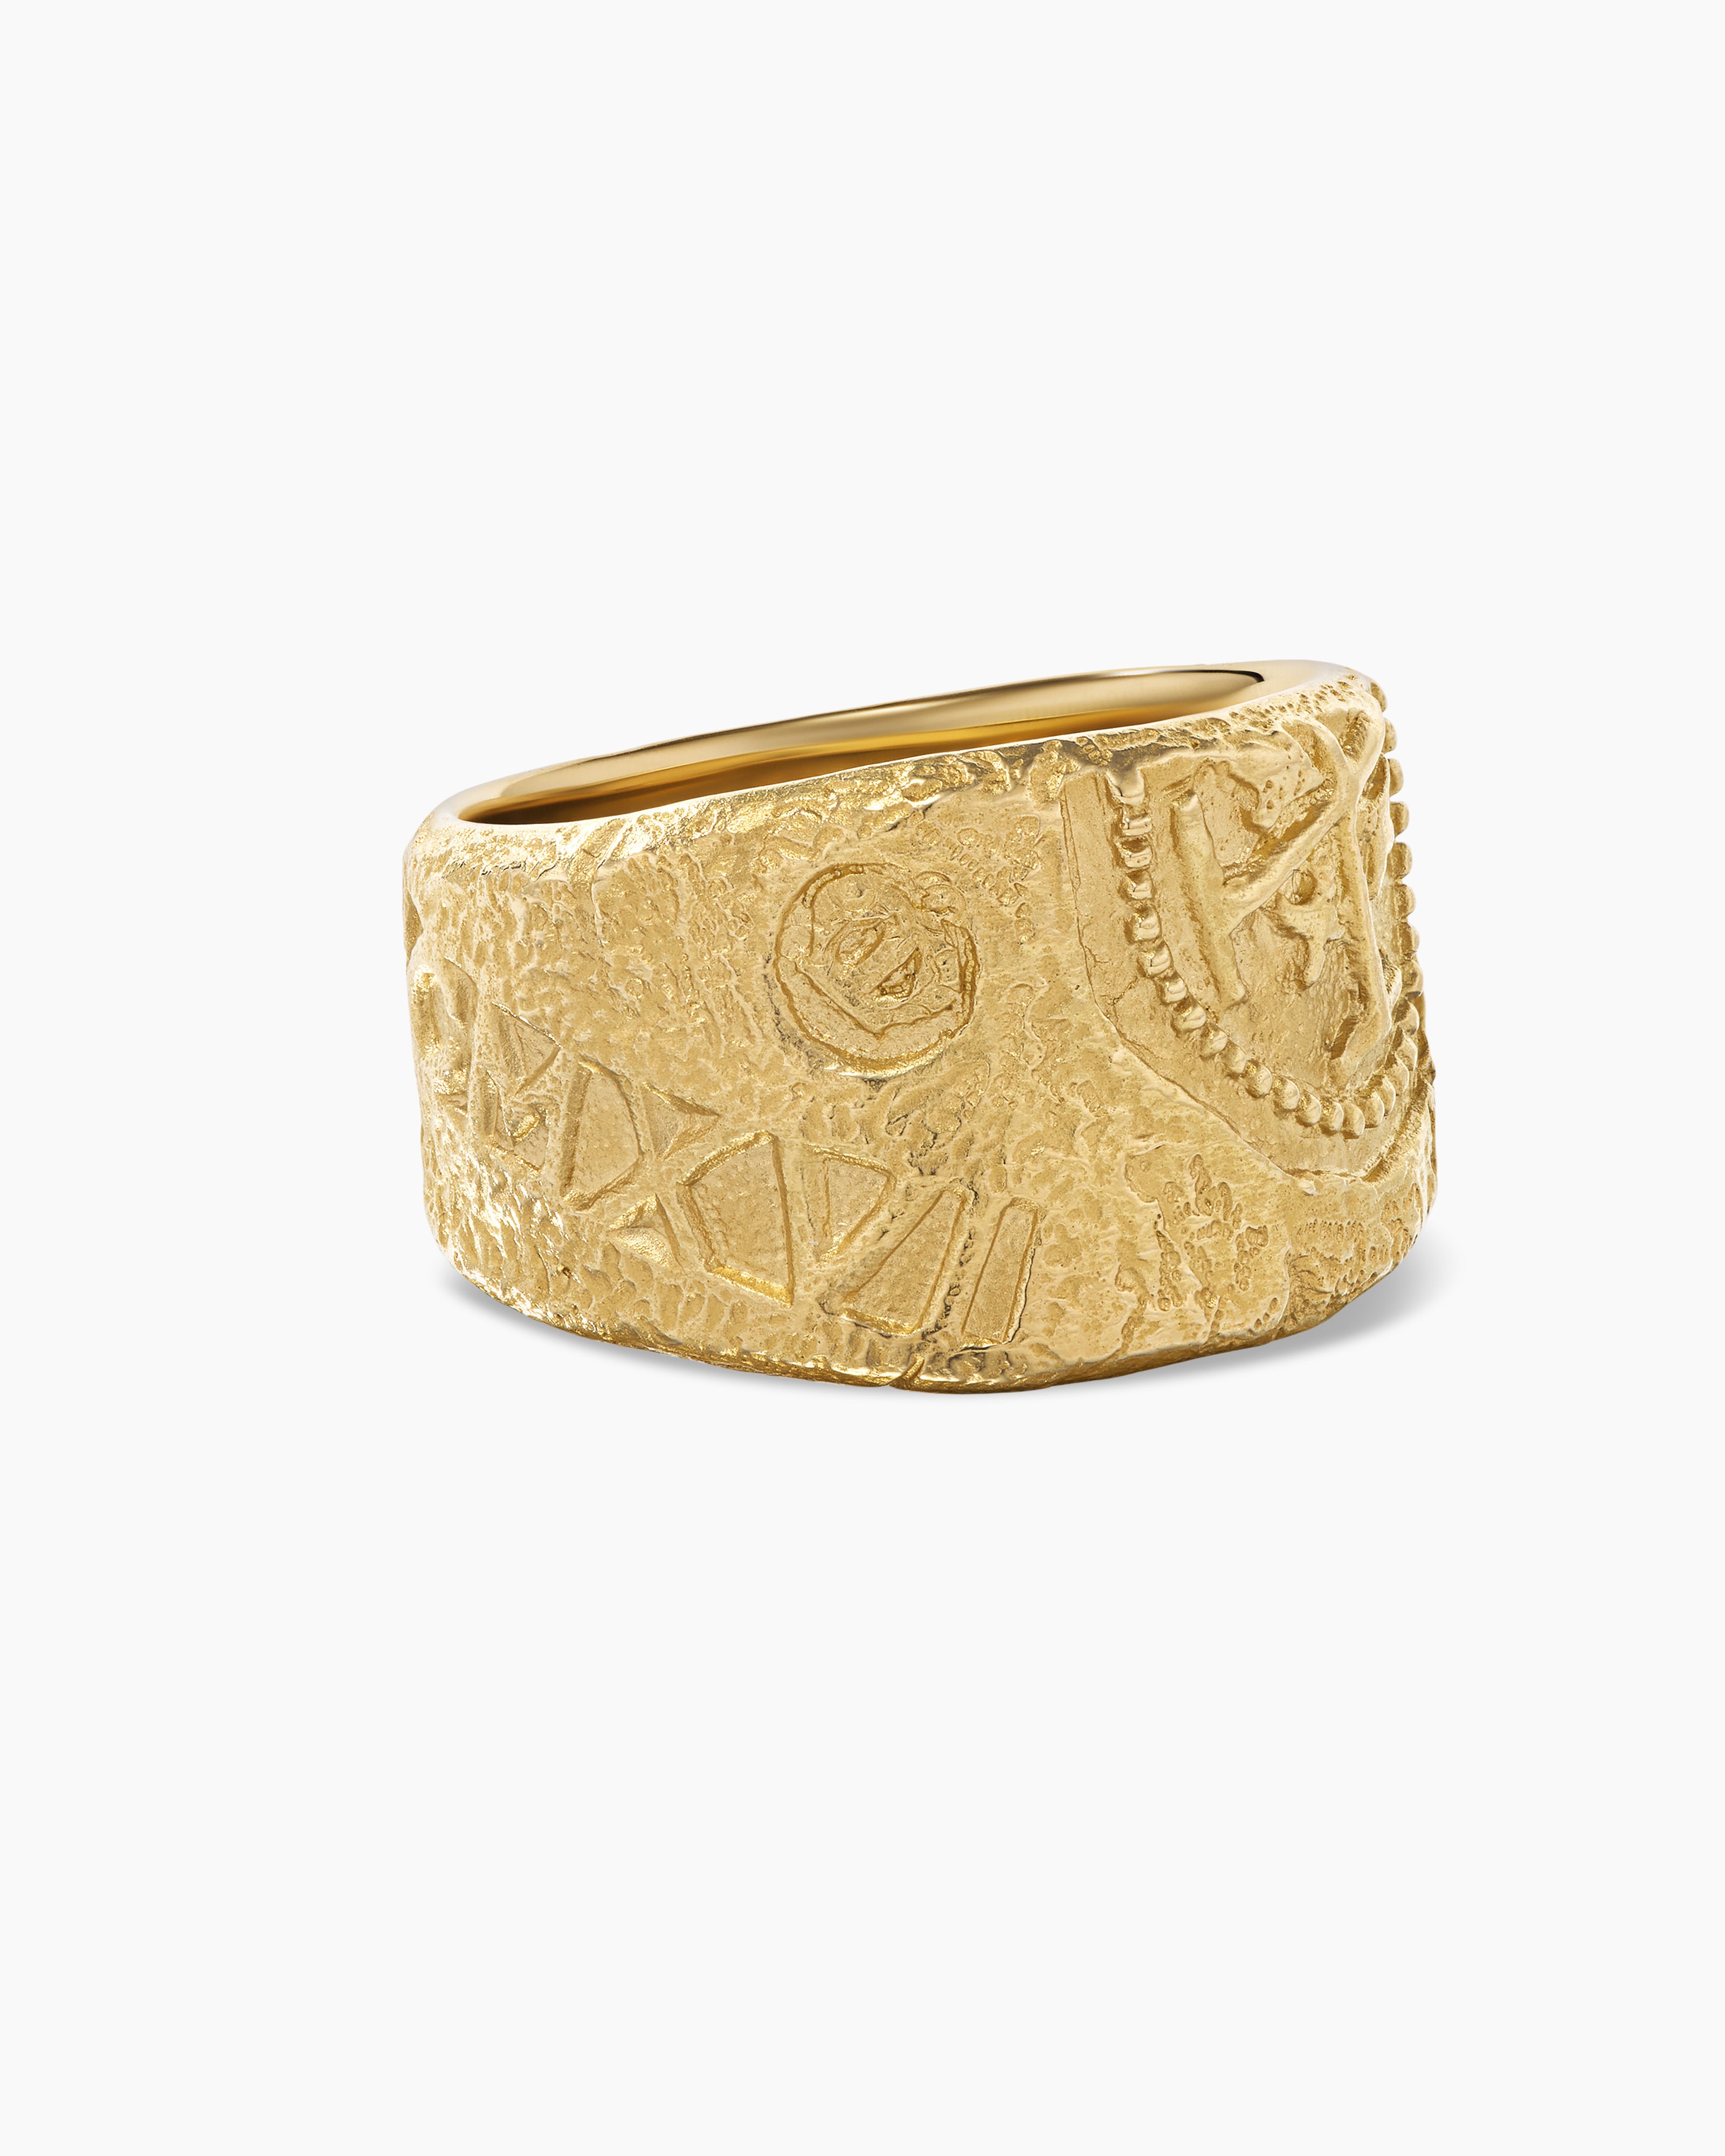 Shipwreck Cigar Band Ring in 18K Yellow Gold, 15mm